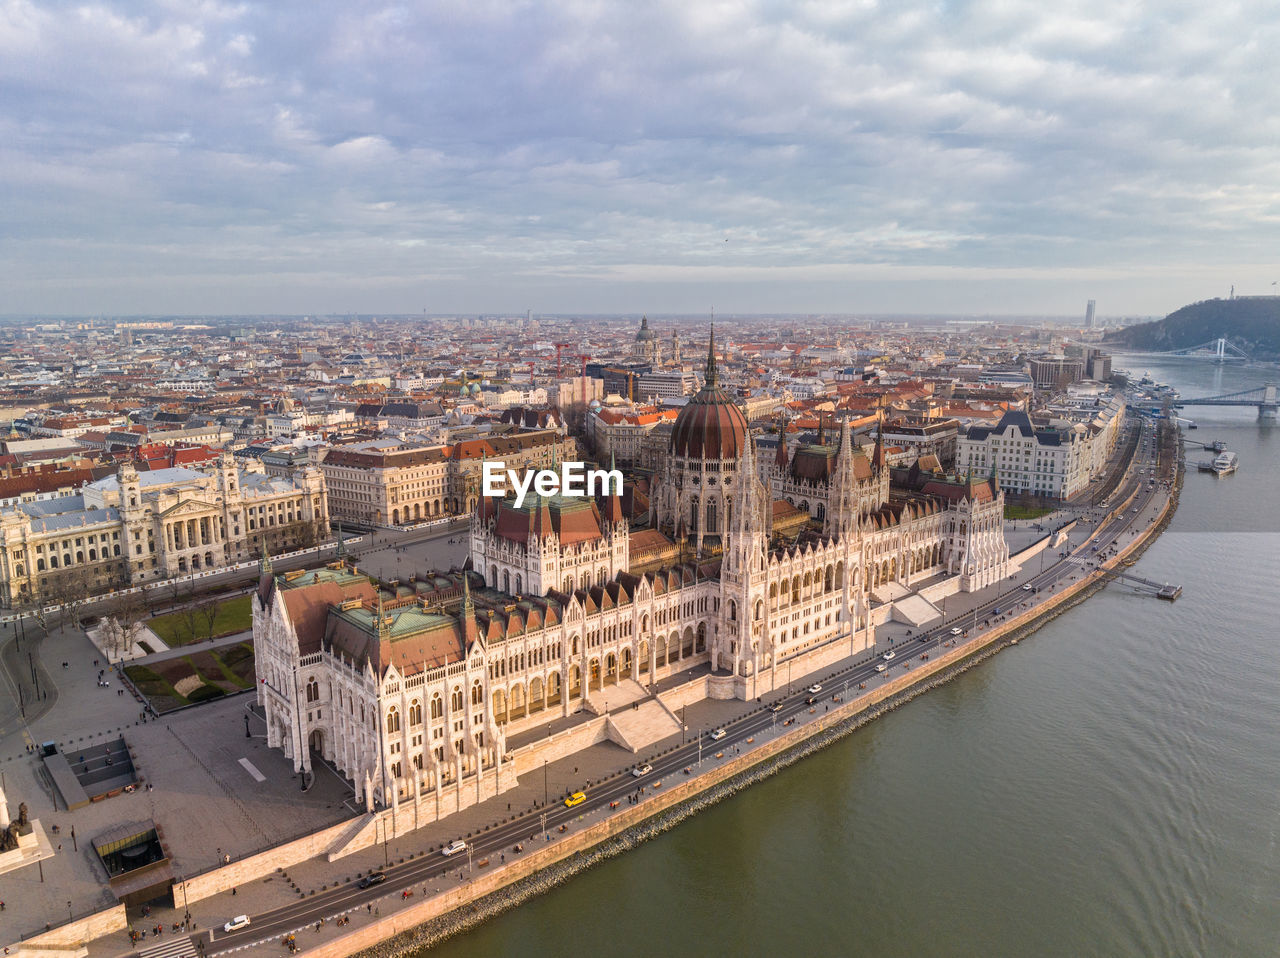 Hungarian parliament building in budapest cityscape a bird's eye view from a drone point